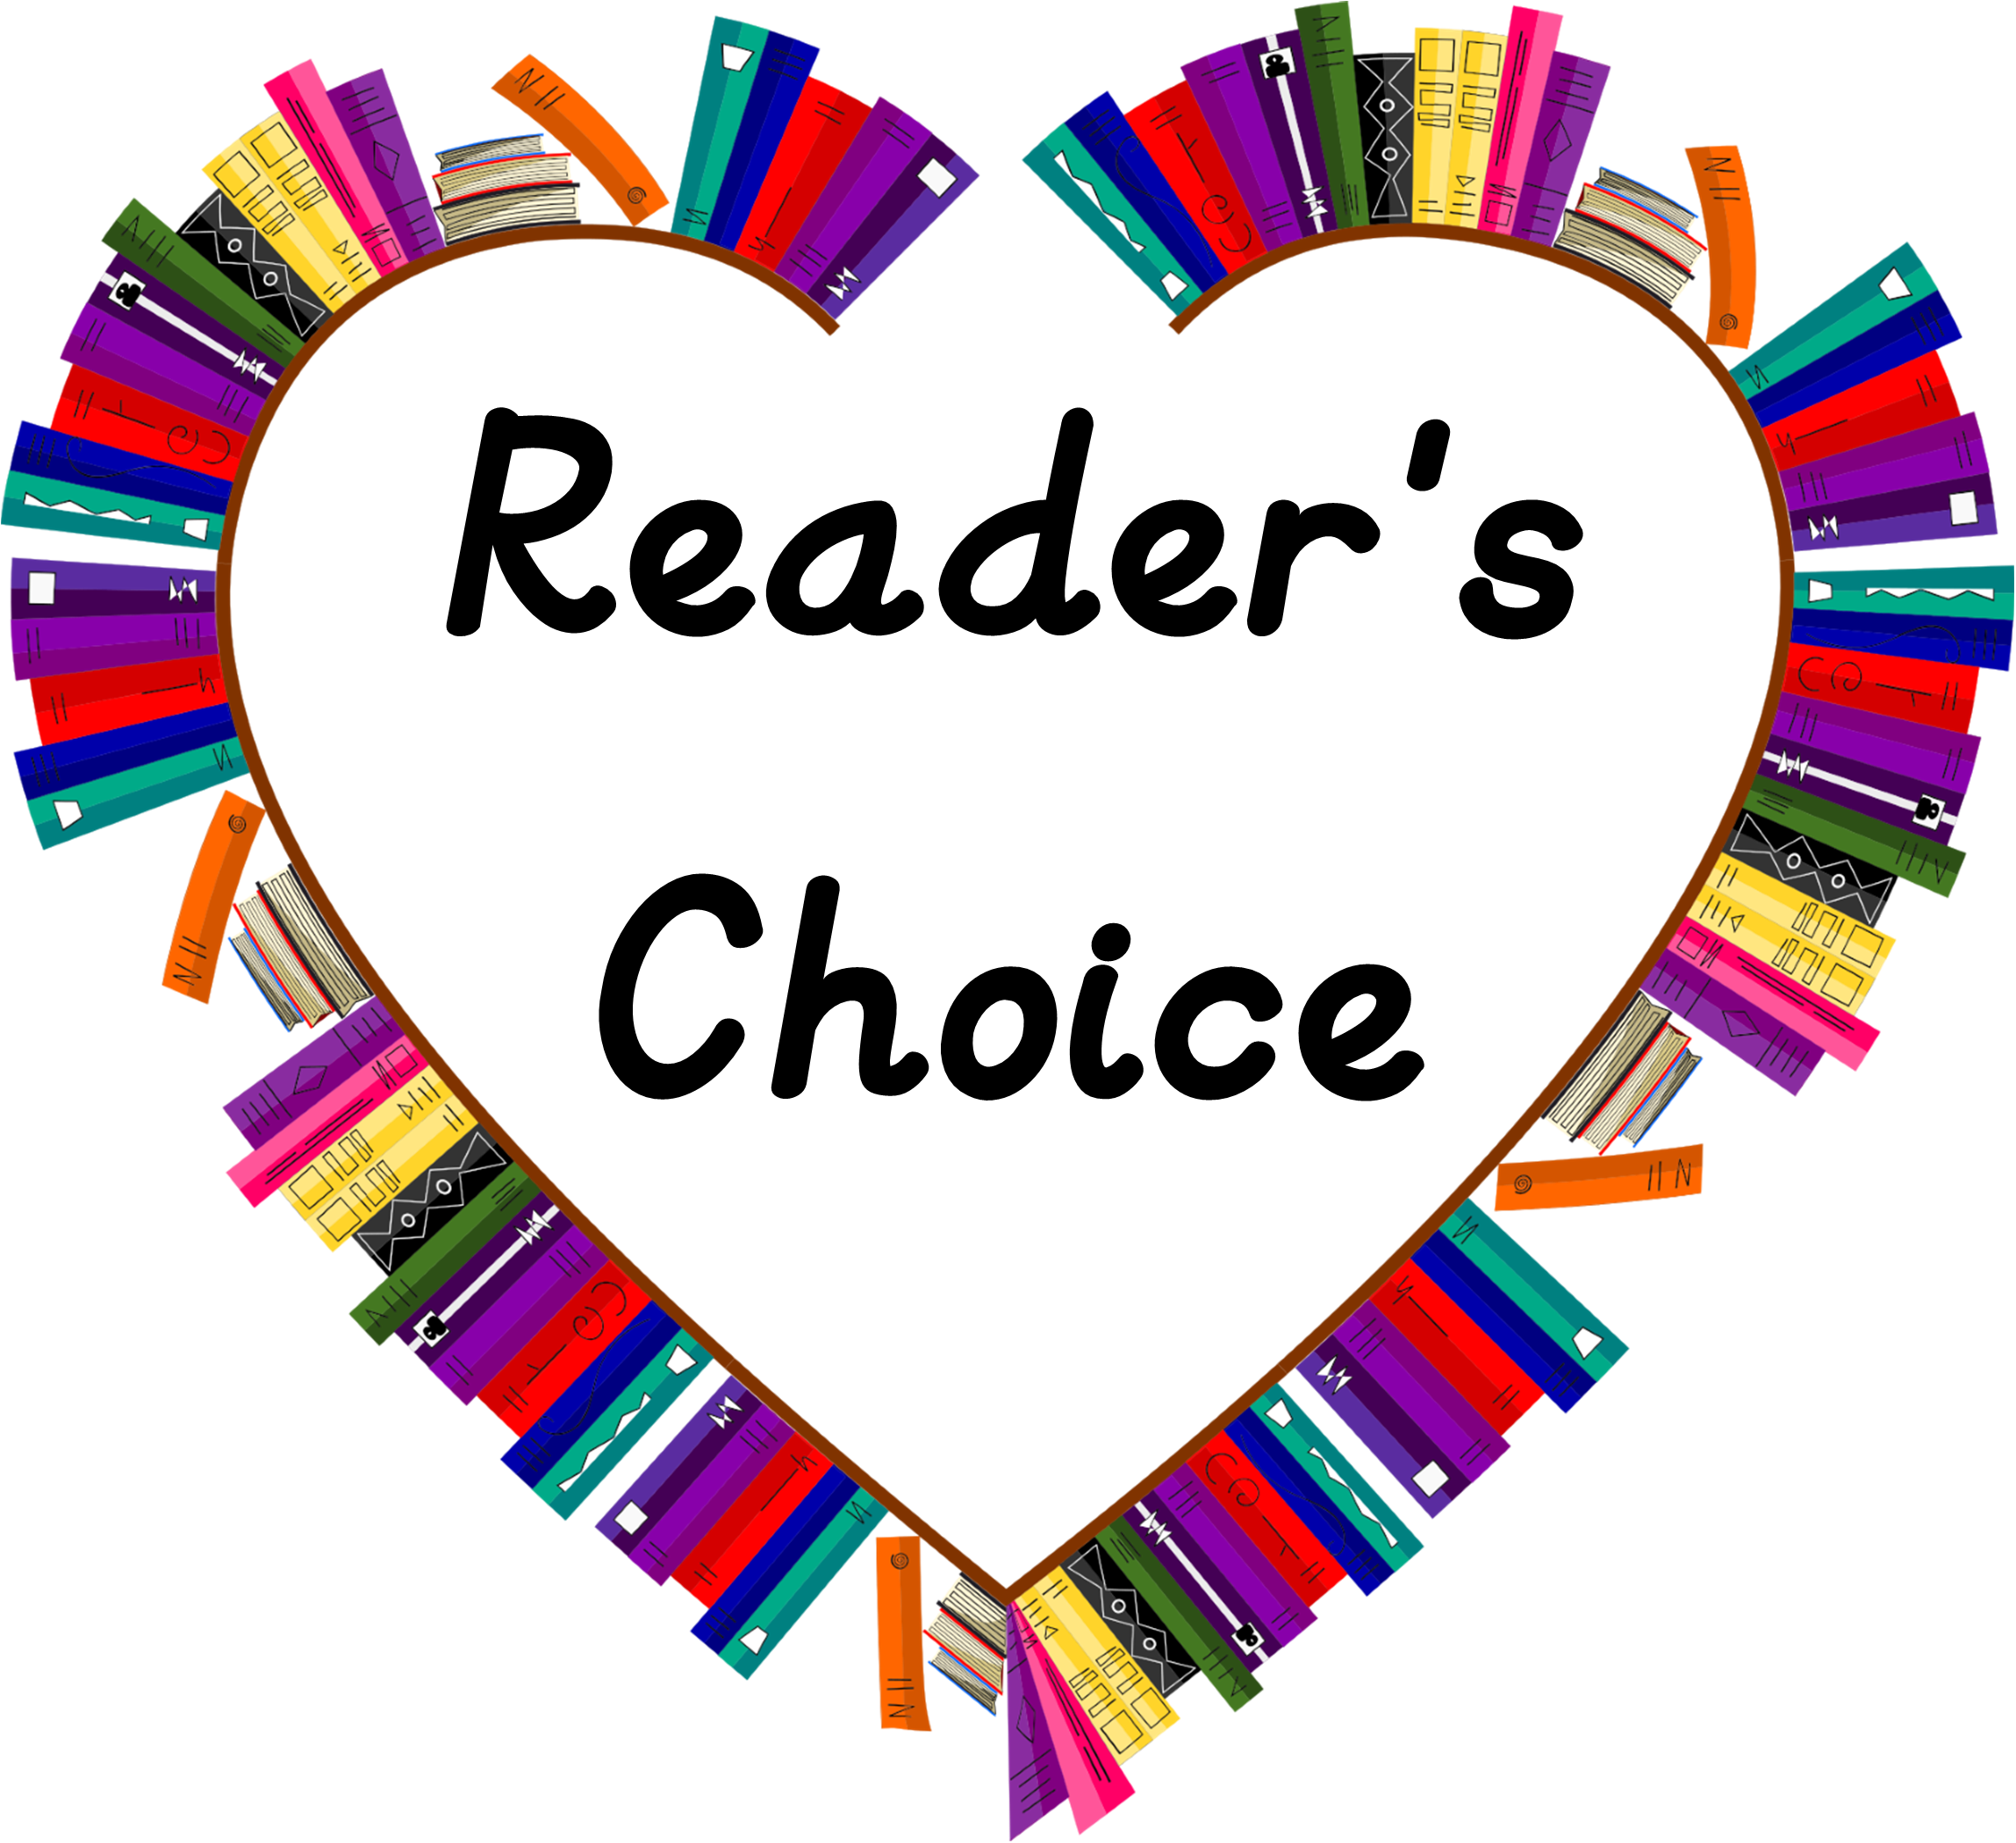 Illustration of books on book shelves in the shape of a heart around the words Reader's Choice.